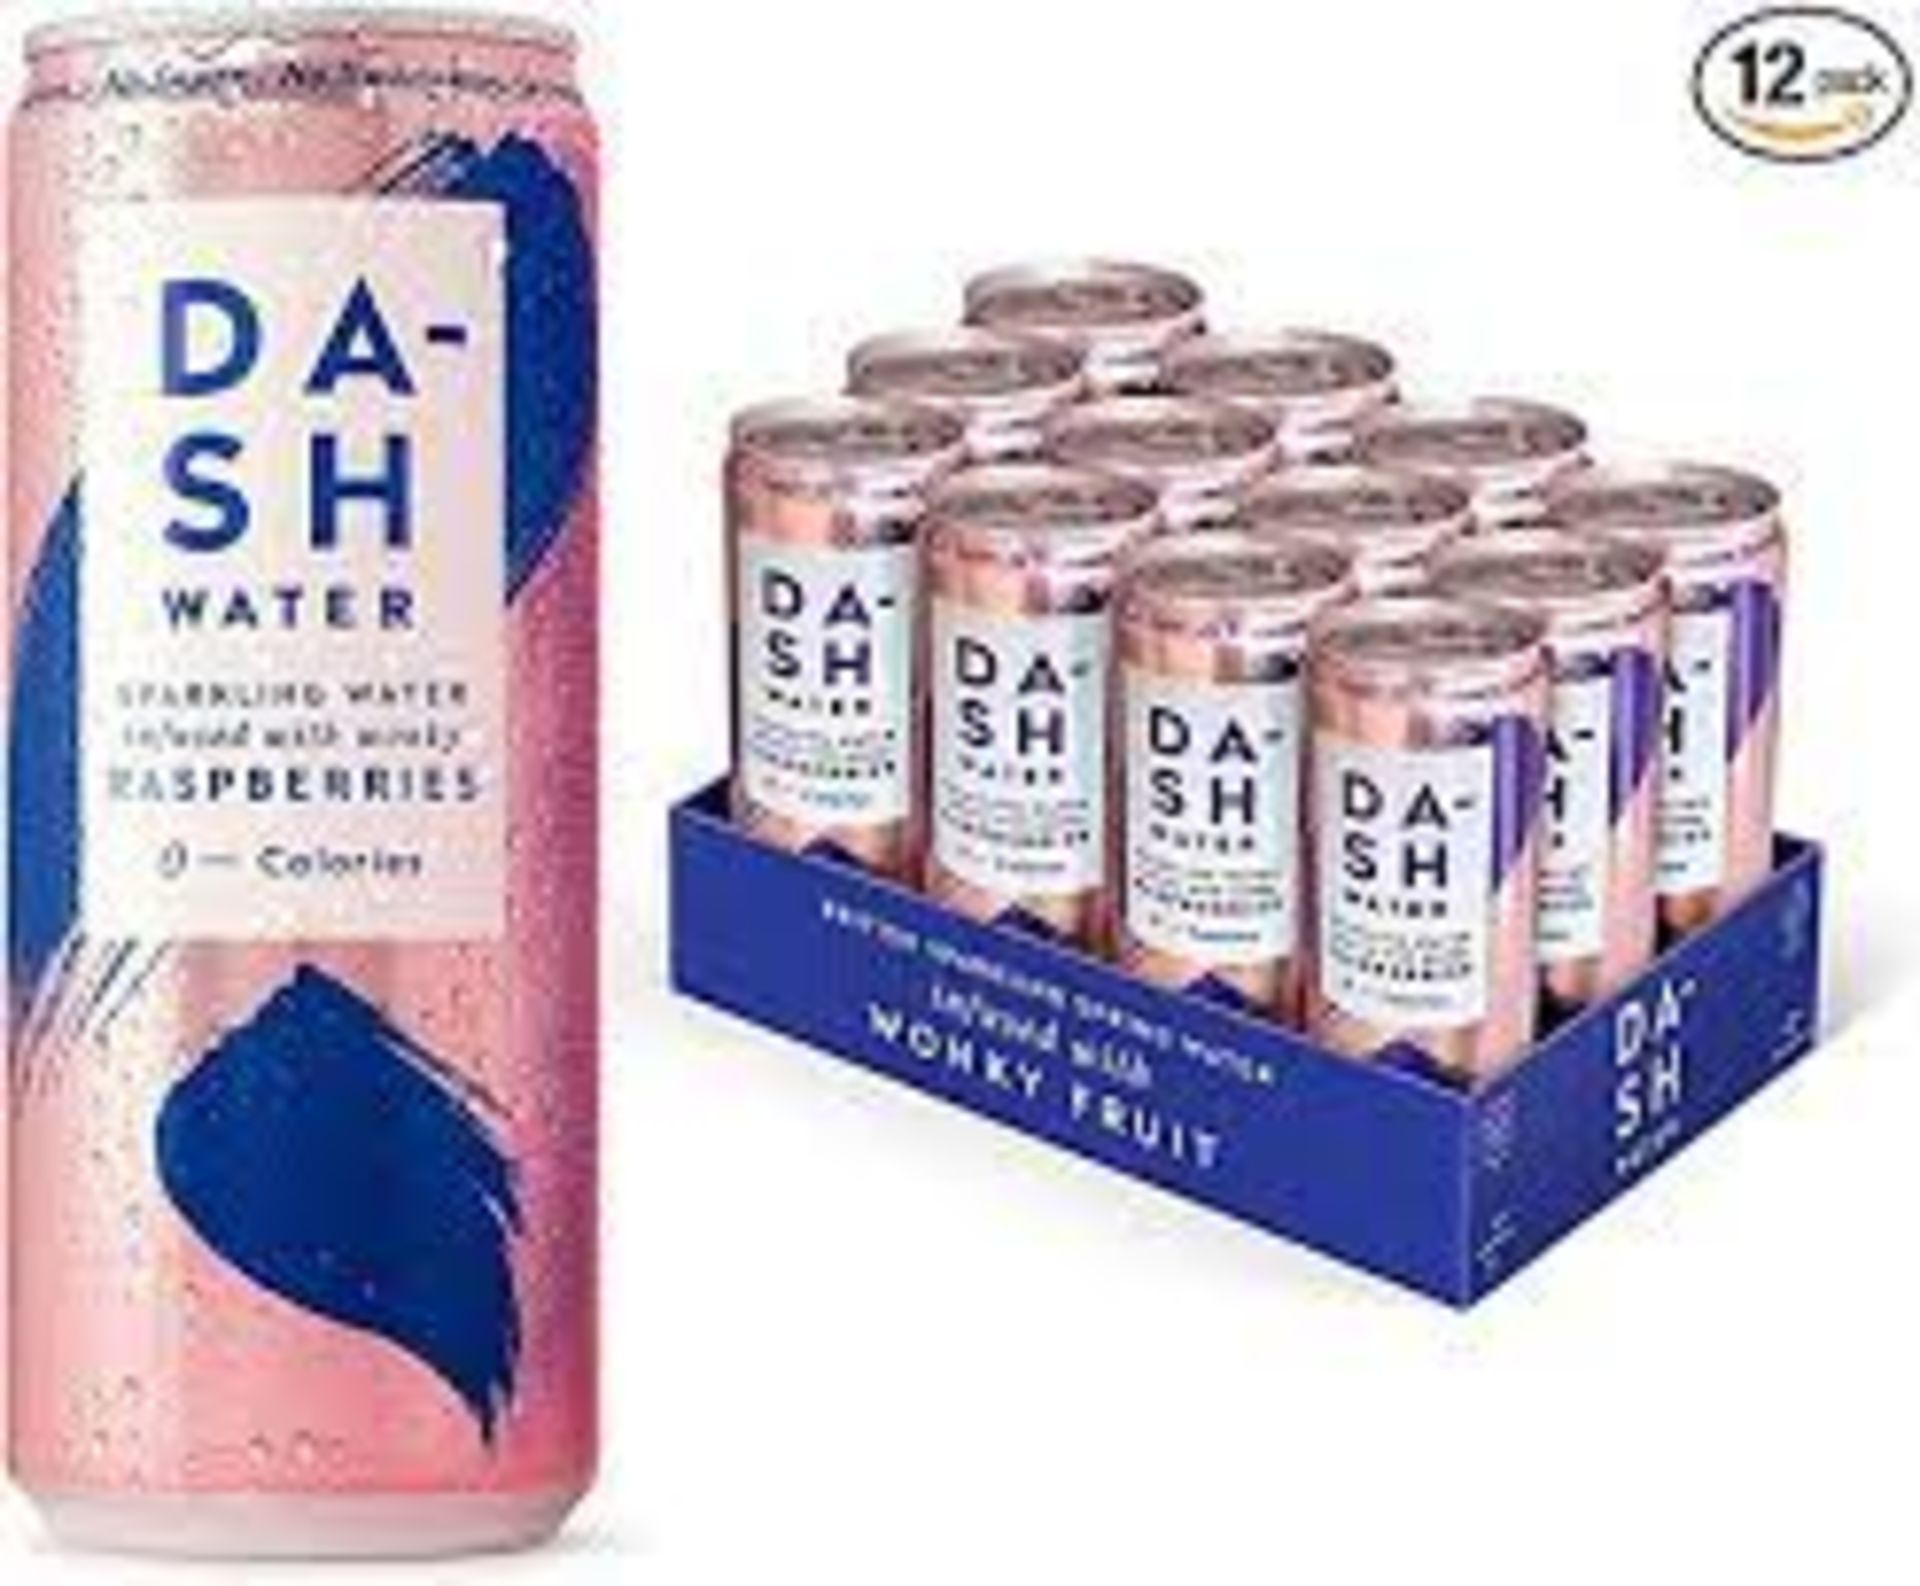 RRP £1213 (Approx. Count 80) Spid011Hiij Dash Water Raspberry & Peach Mixed Pack - 12 X Flavoured